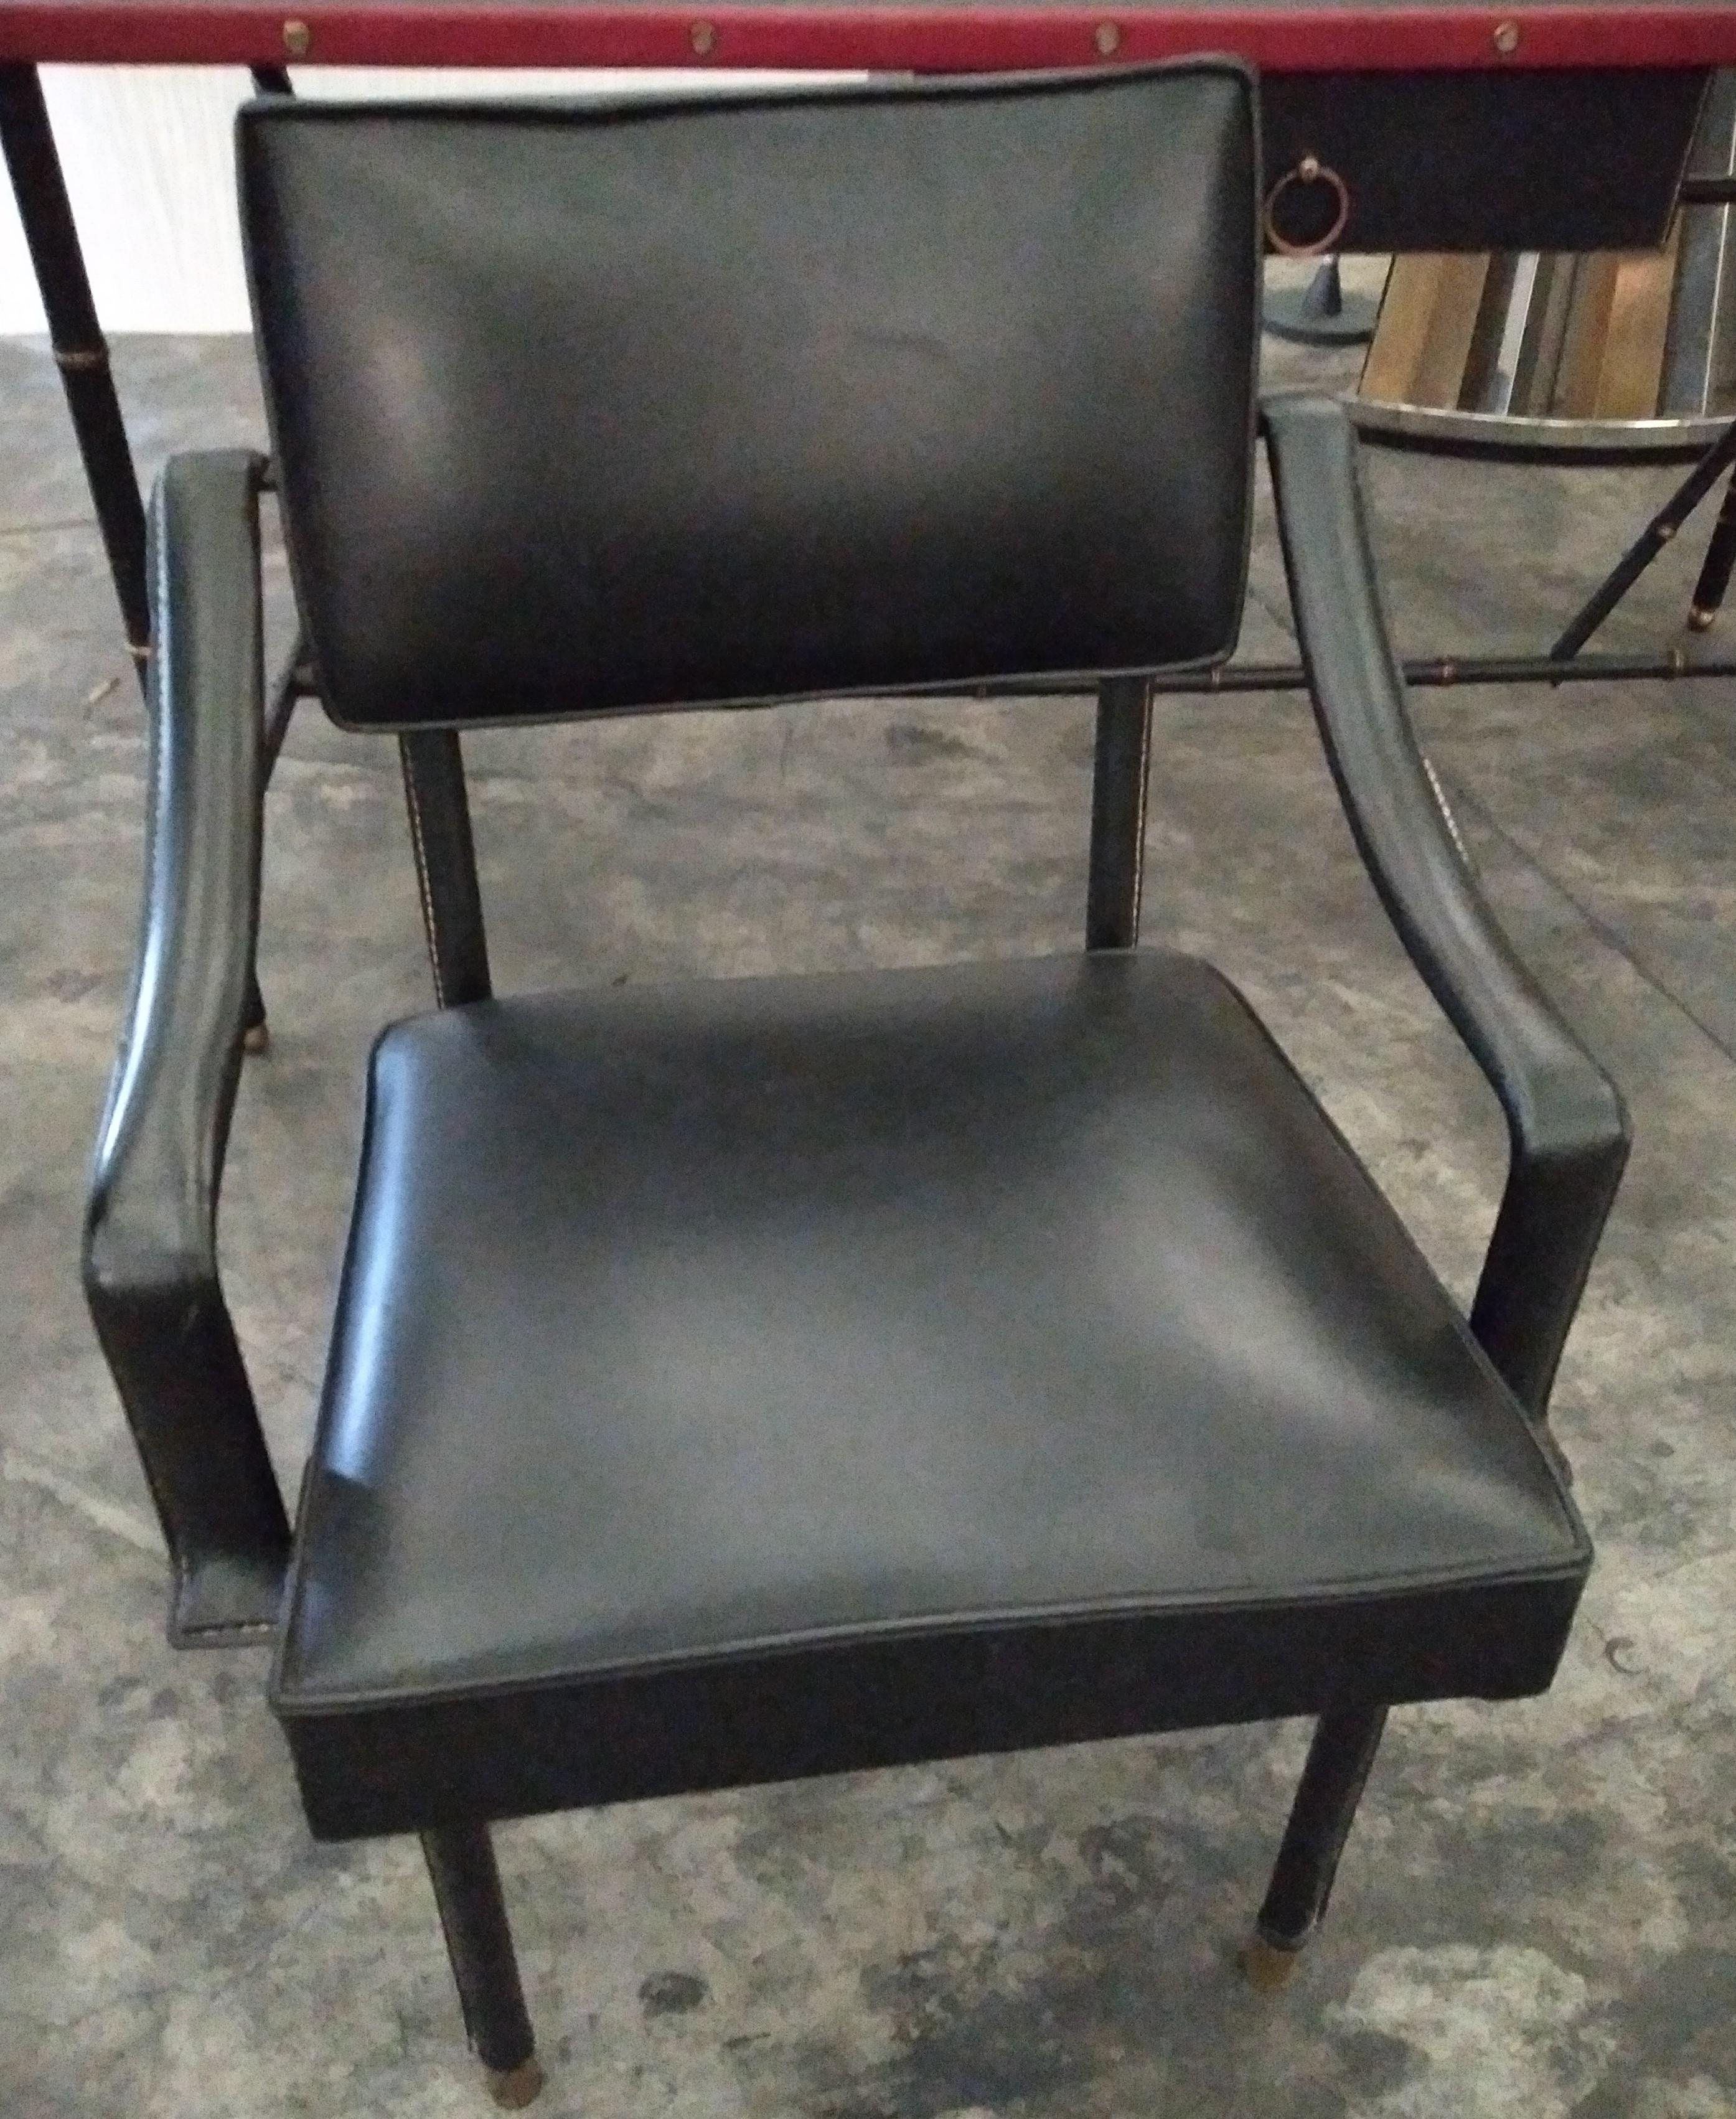 A pair of black leather armchairs designed by Jacques Adnet in France in 1950s.
The metal structure is fully covered in saddle stitched leather. It rests on four gilt bronze feet. 
It can be installed as an office chair or a second is available to